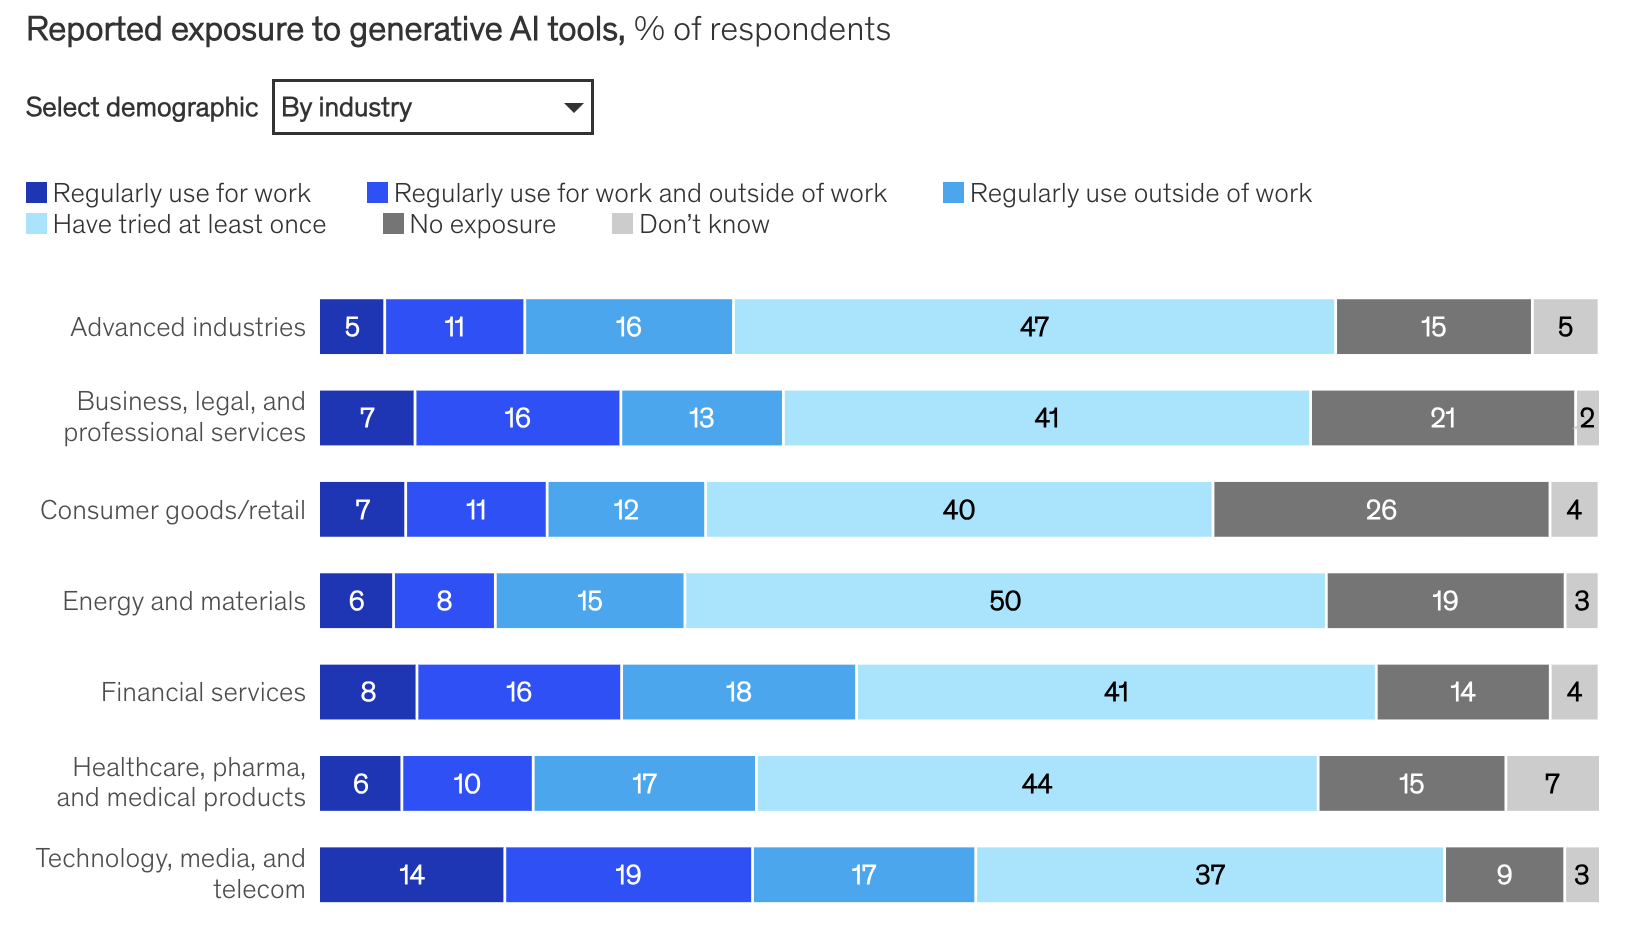 generative AI tools at work by industry study statistics 2023